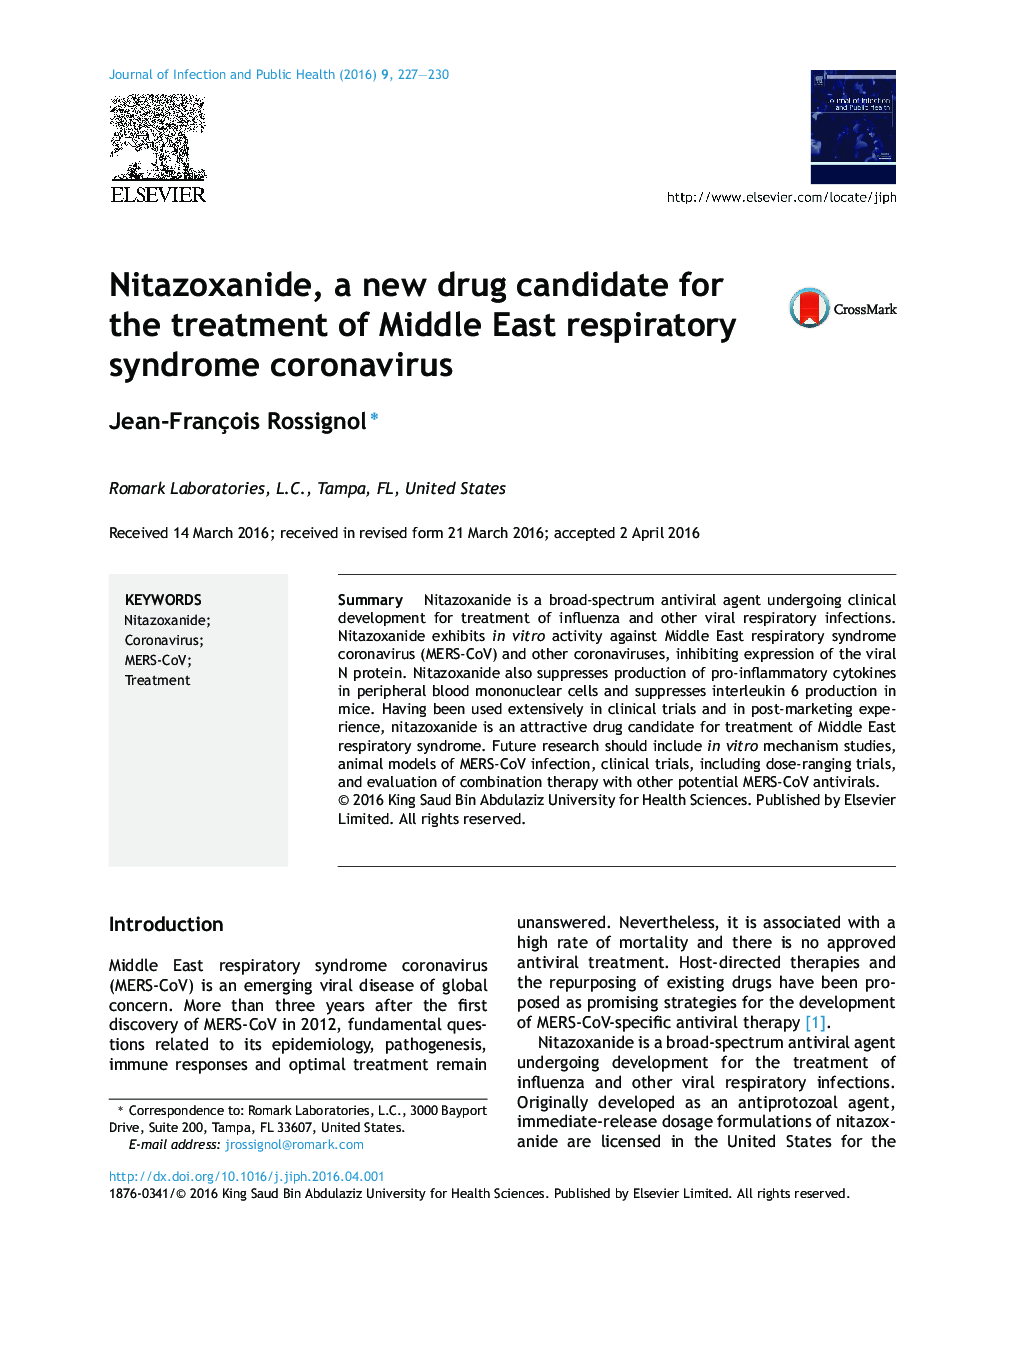 Nitazoxanide, a new drug candidate for the treatment of Middle East respiratory syndrome coronavirus